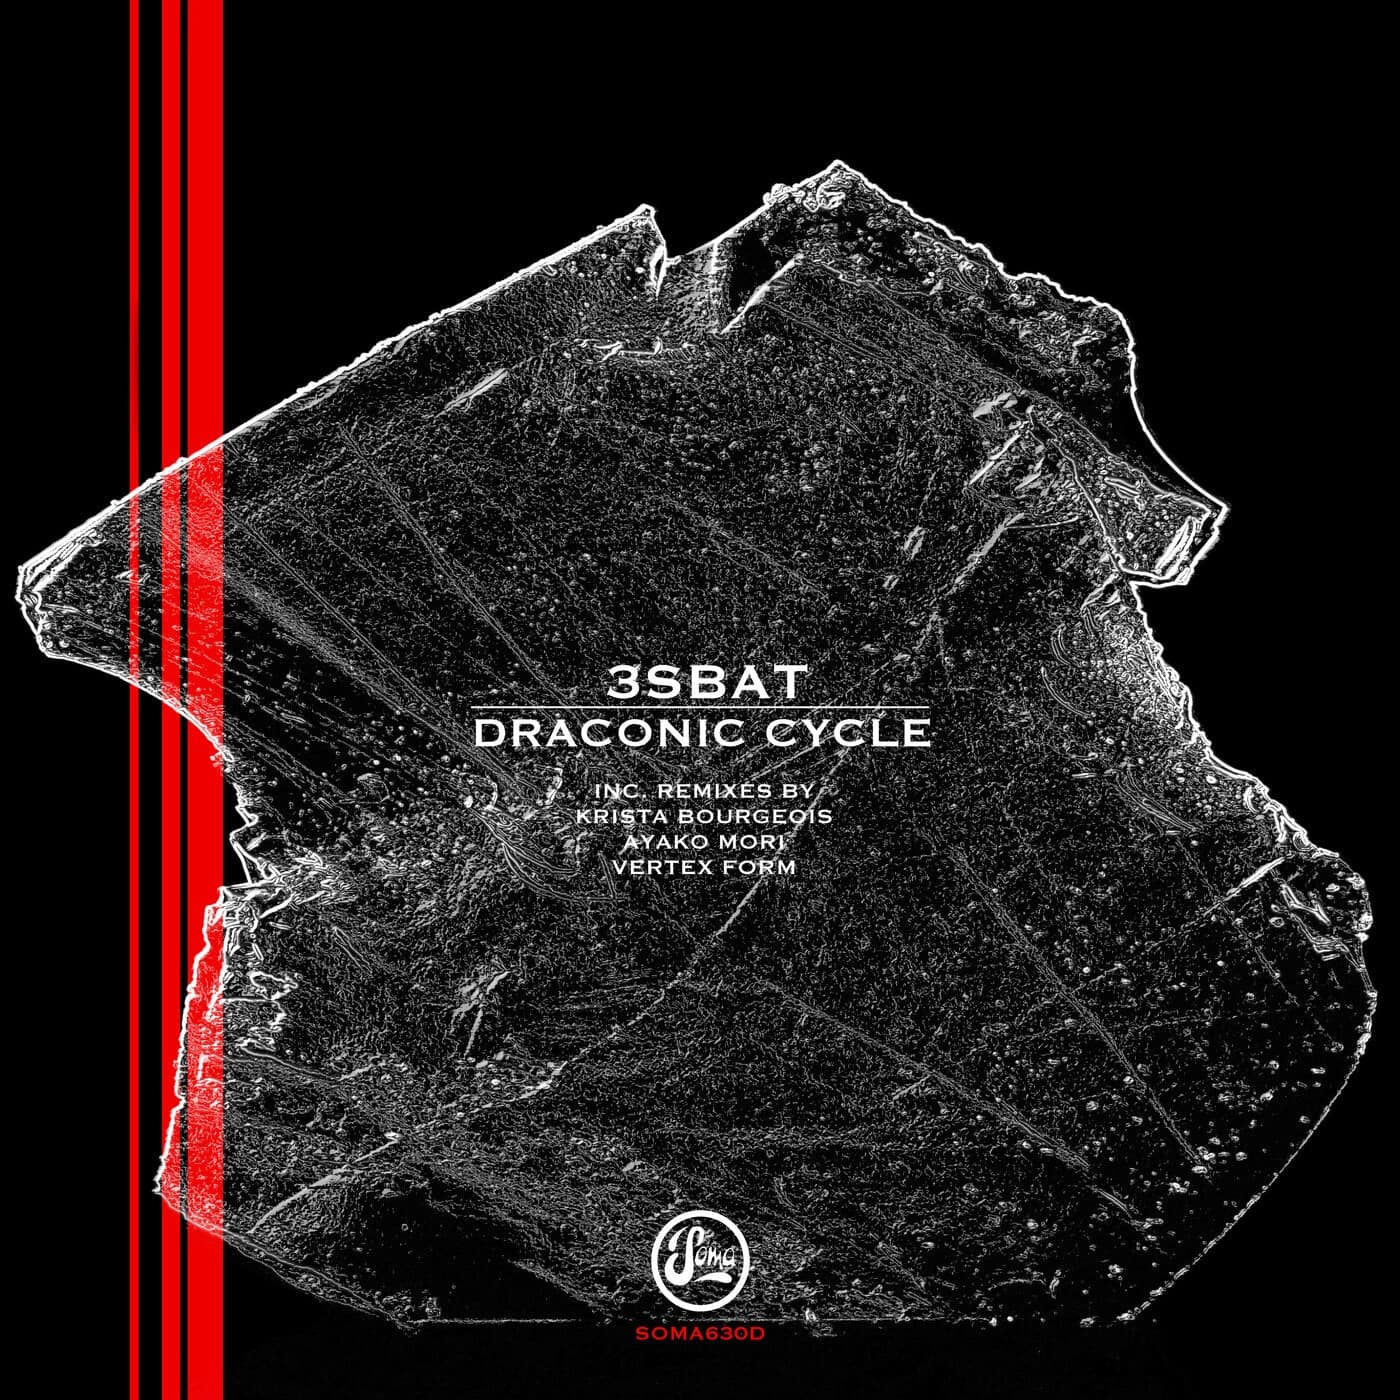 image cover: 3SBAT - Draconic Cycle EP / SOMA630D